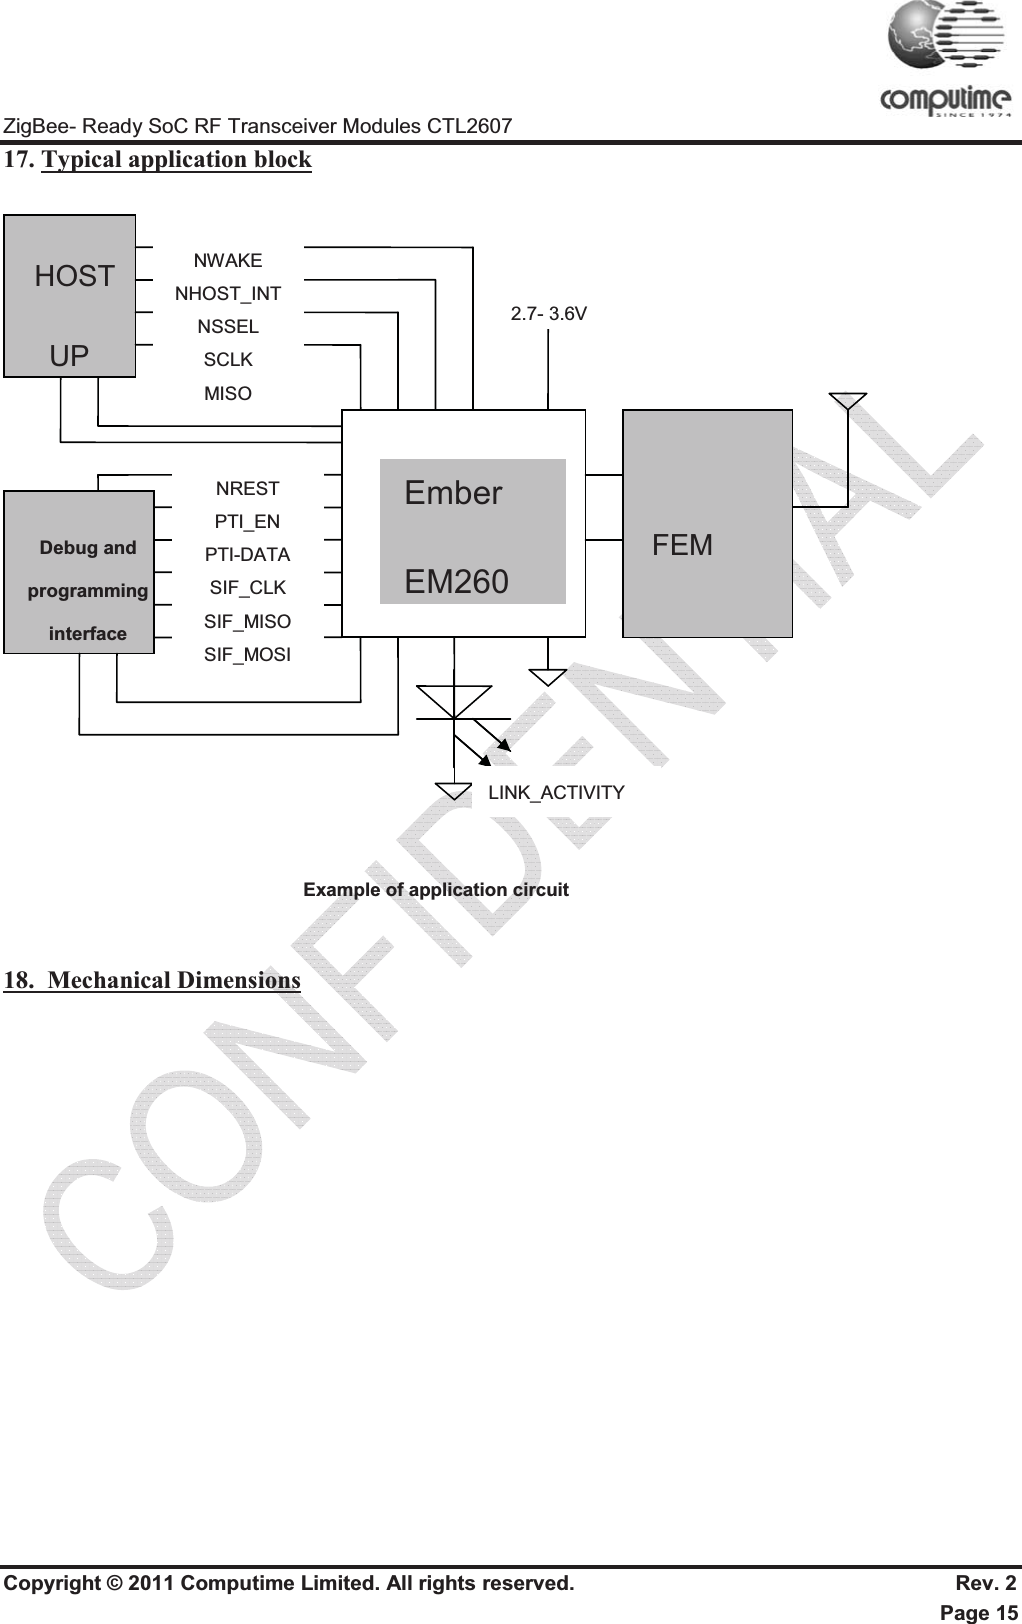 ZigBee- Ready SoC RF Transceiver Modules CTL2607 Copyright © 2011 Computime Limited. All rights reserved.                                                       Rev. 2 Page 15 17. Typical application blockExample of application circuit 18.  Mechanical Dimensions Ember EM2602.7- 3.6V Debug and programminginterface HOST UPNREST PTI_EN PTI-DATA SIF_CLK SIF_MISO SIF_MOSI LINK_ACTIVITY   FEM NWAKE NHOST_INT NSSEL SCLK MISO